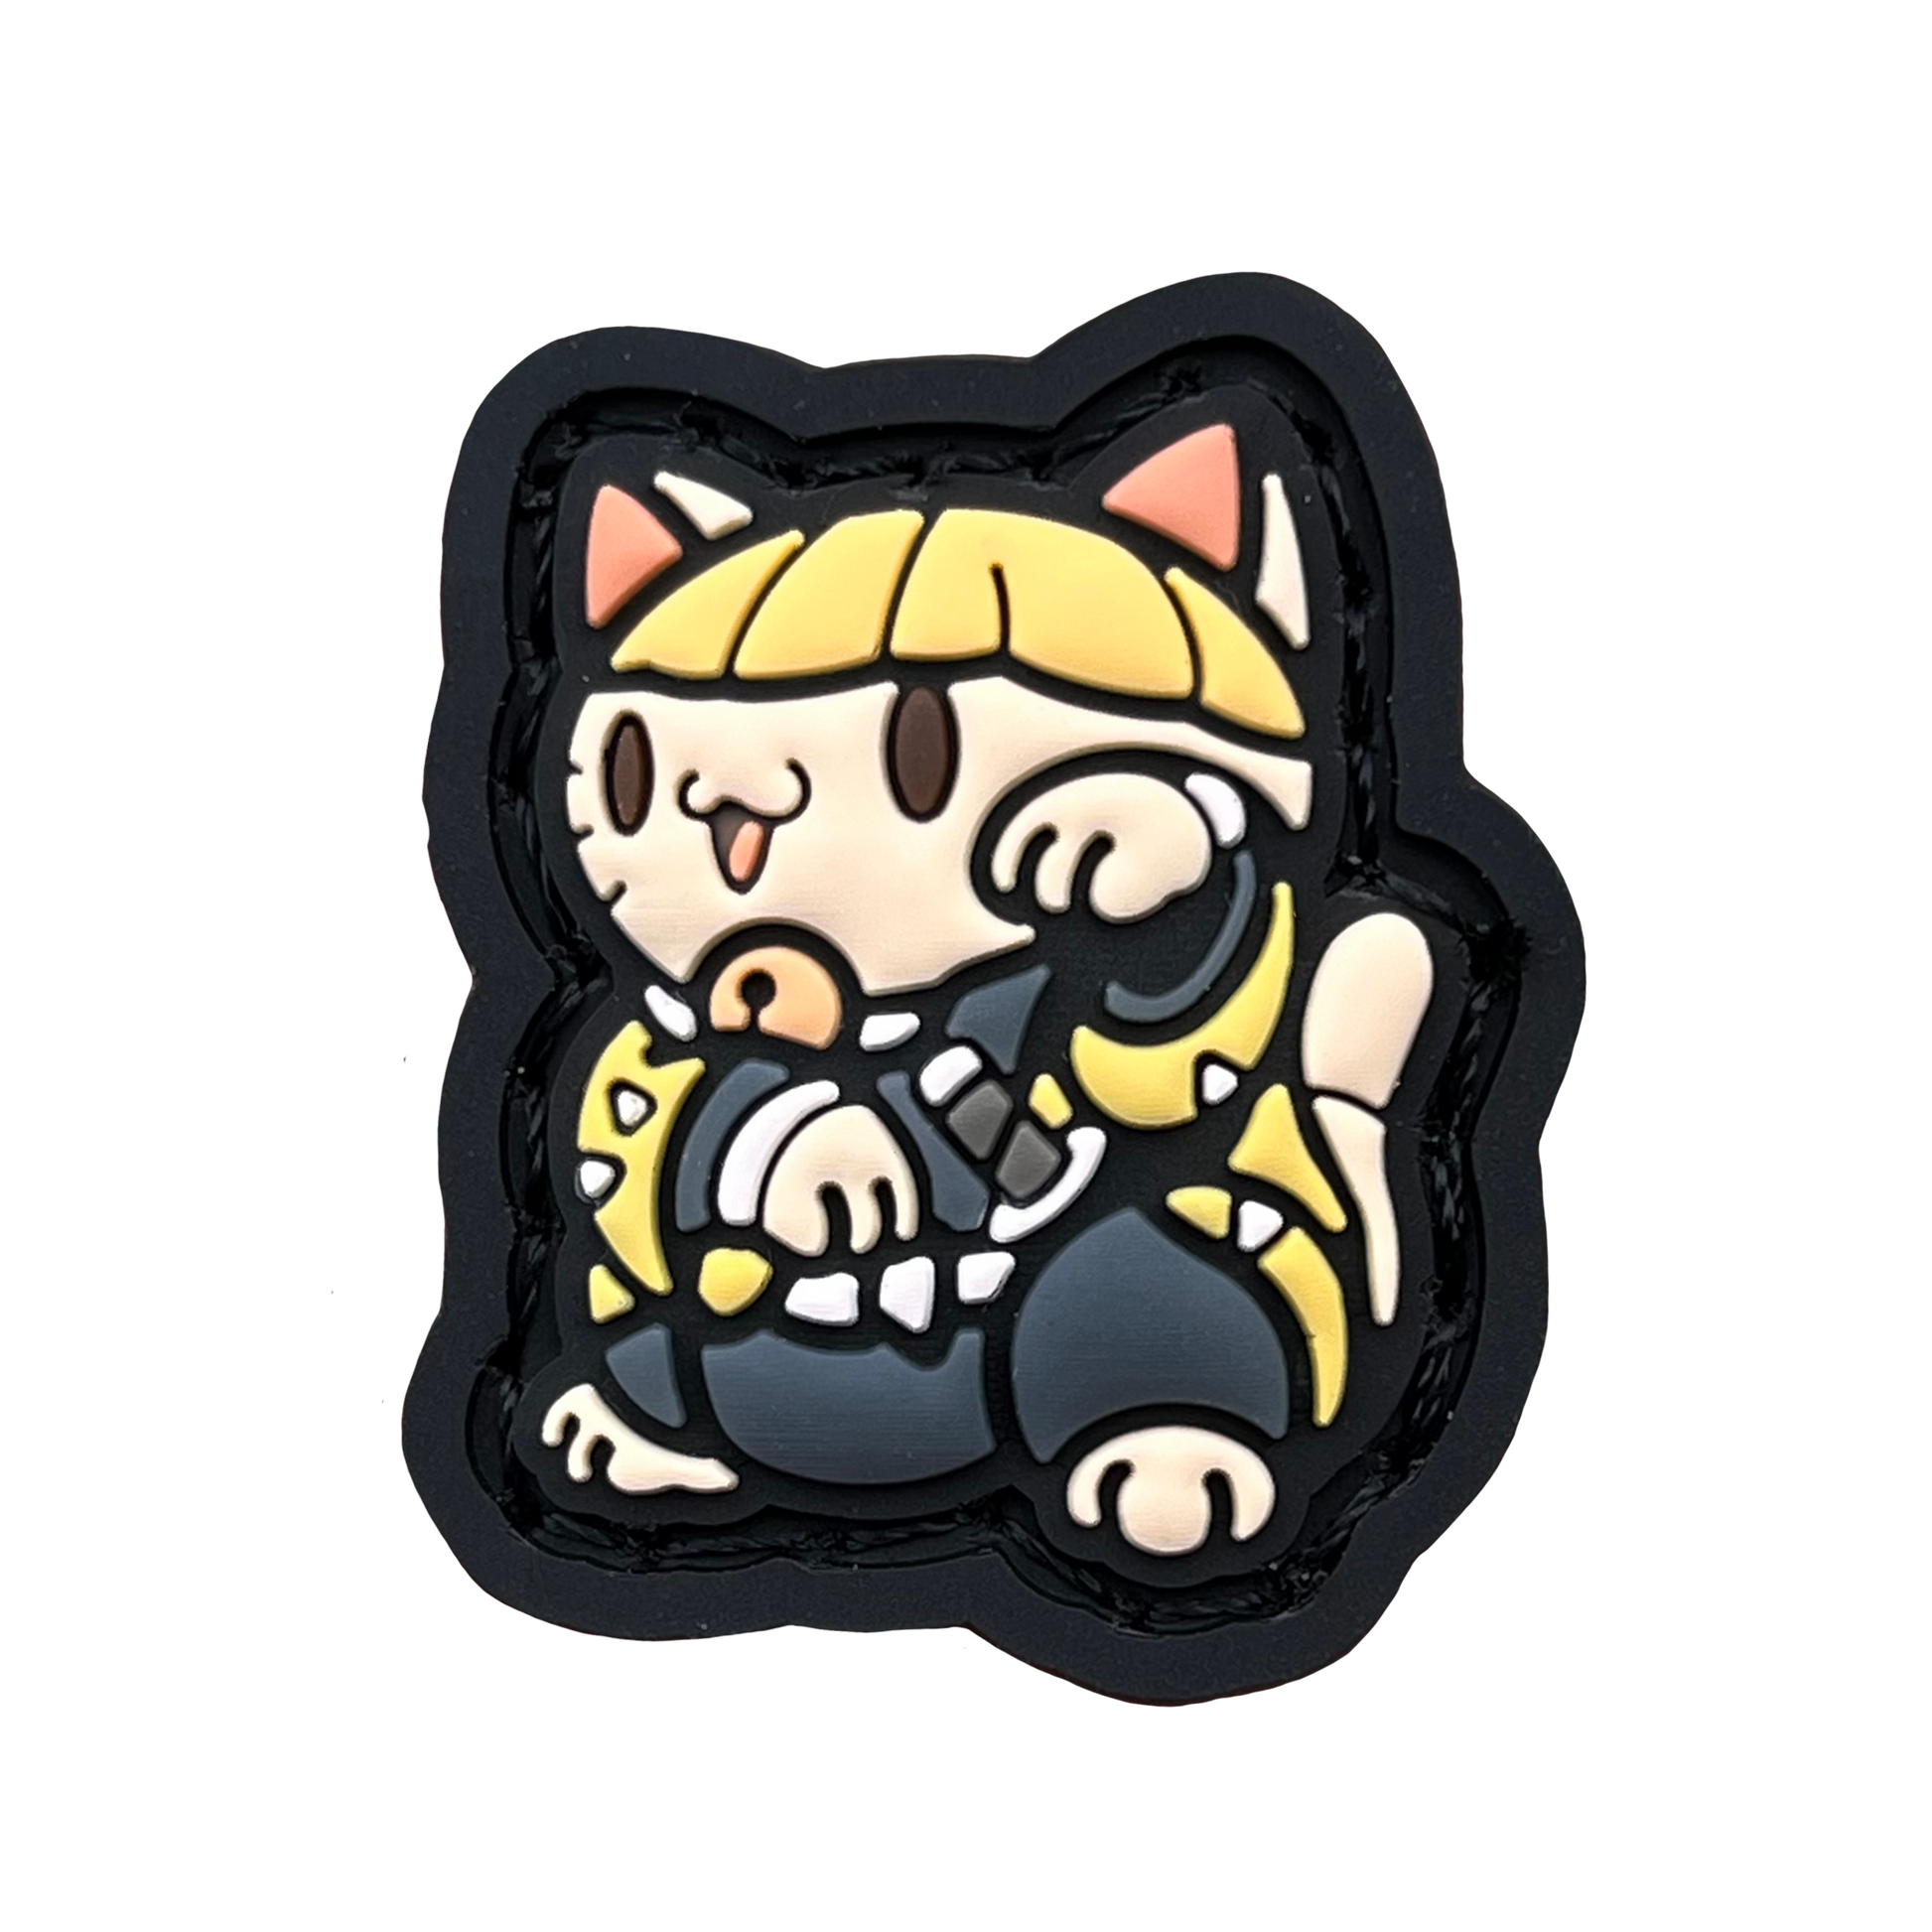 a small patch depicting zenitsu of demon slayer in a lucky cat (neko) pose for good fortune.